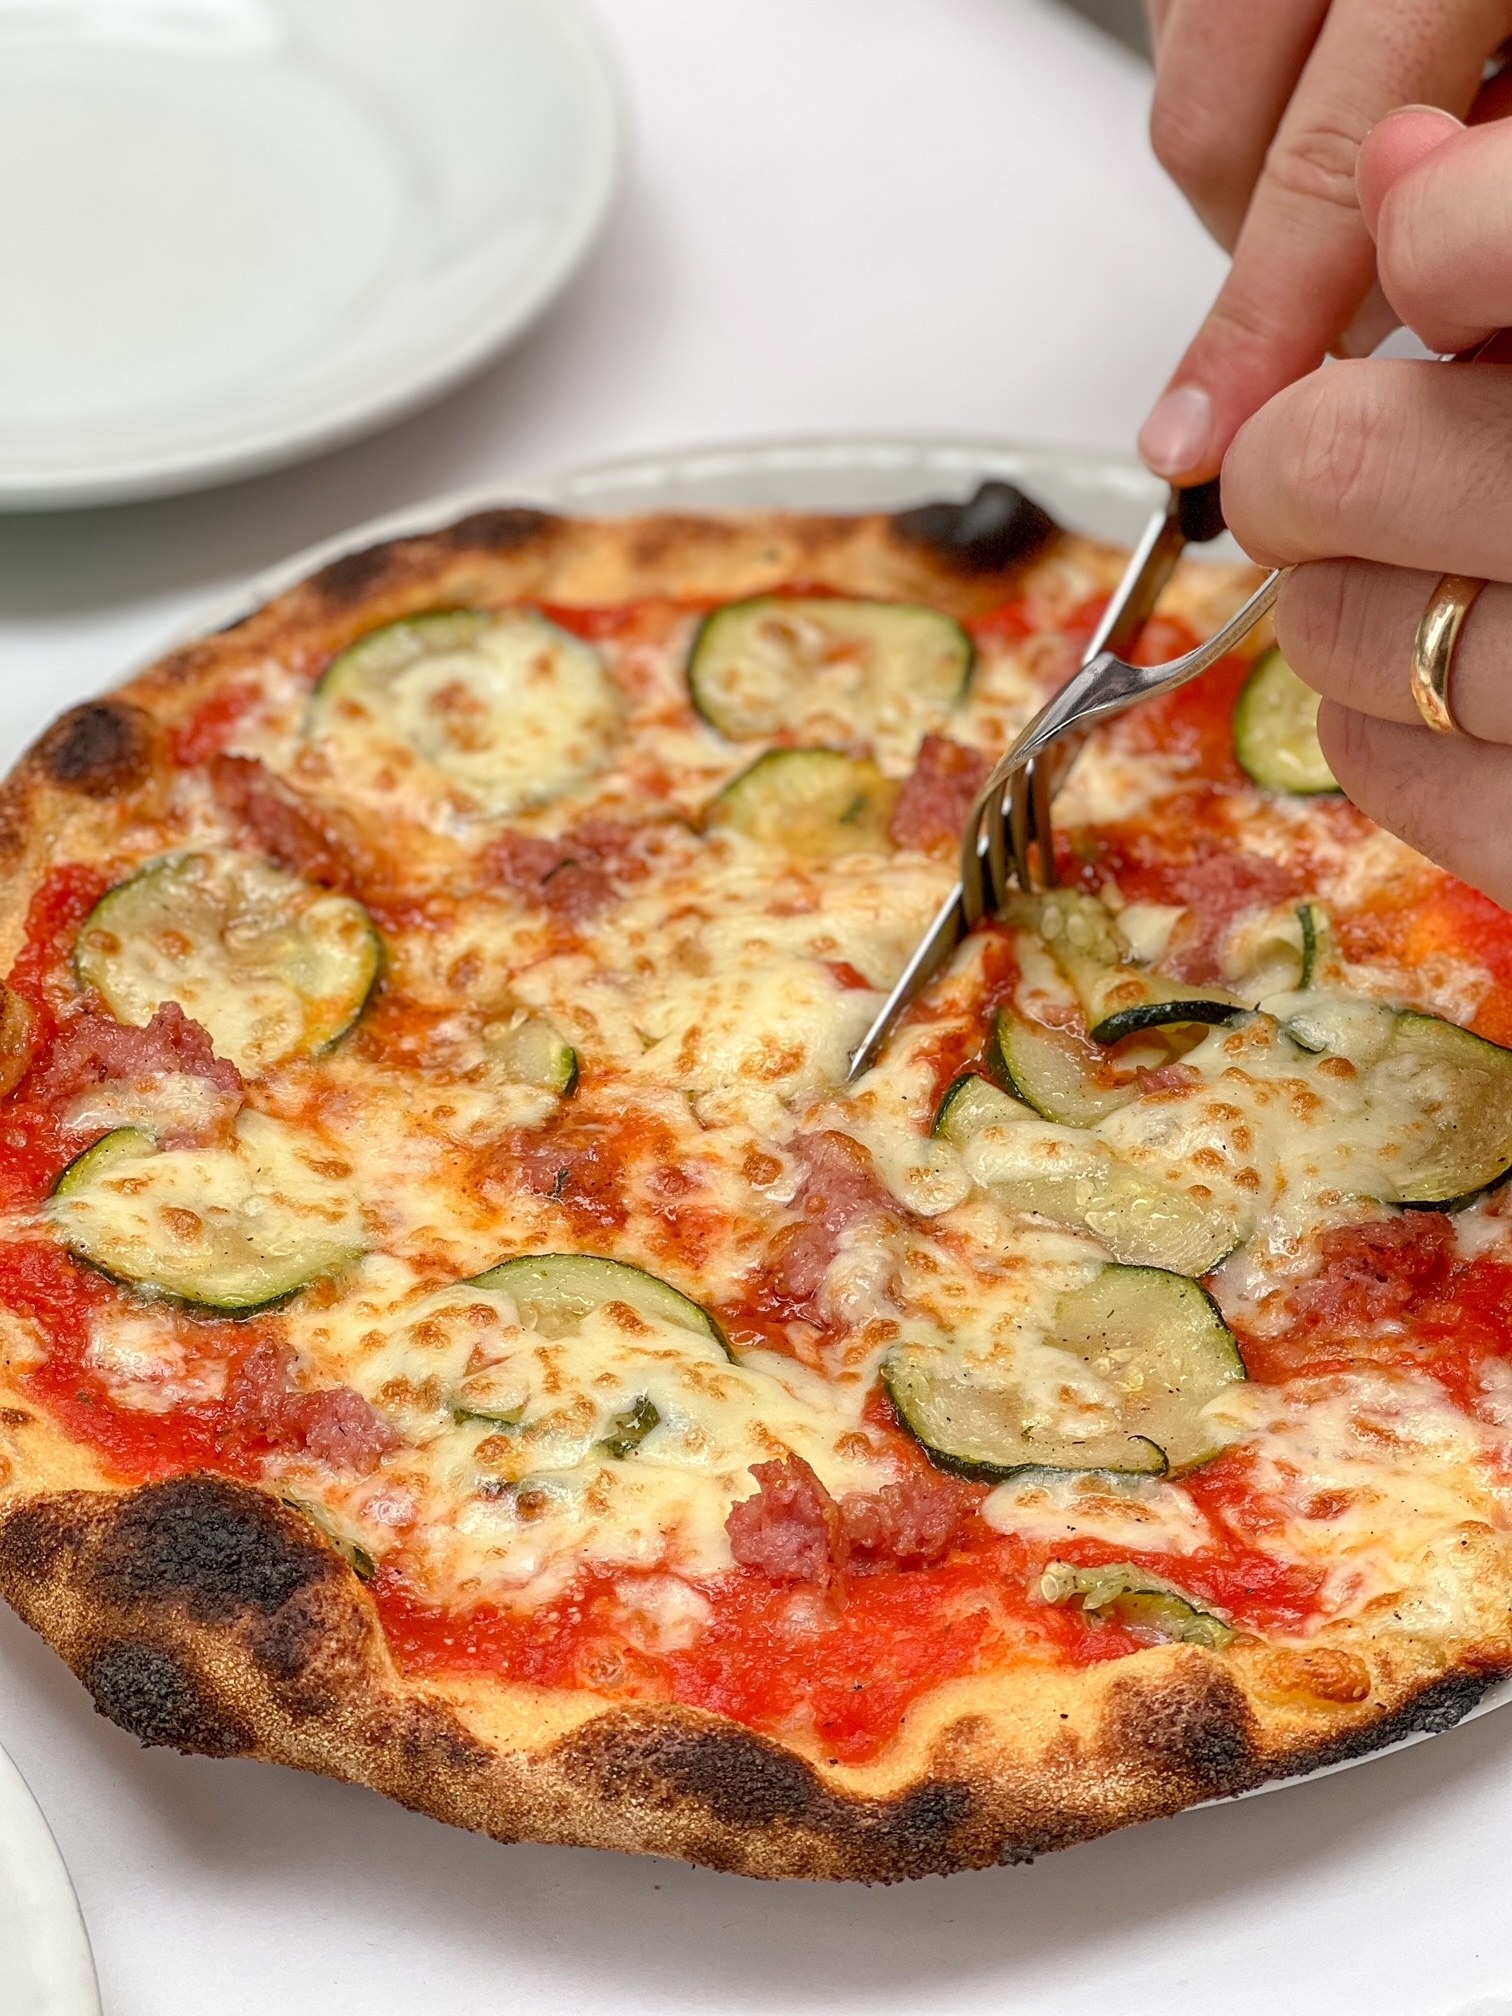 Slicing in pizza topped with cheese and zucchini.